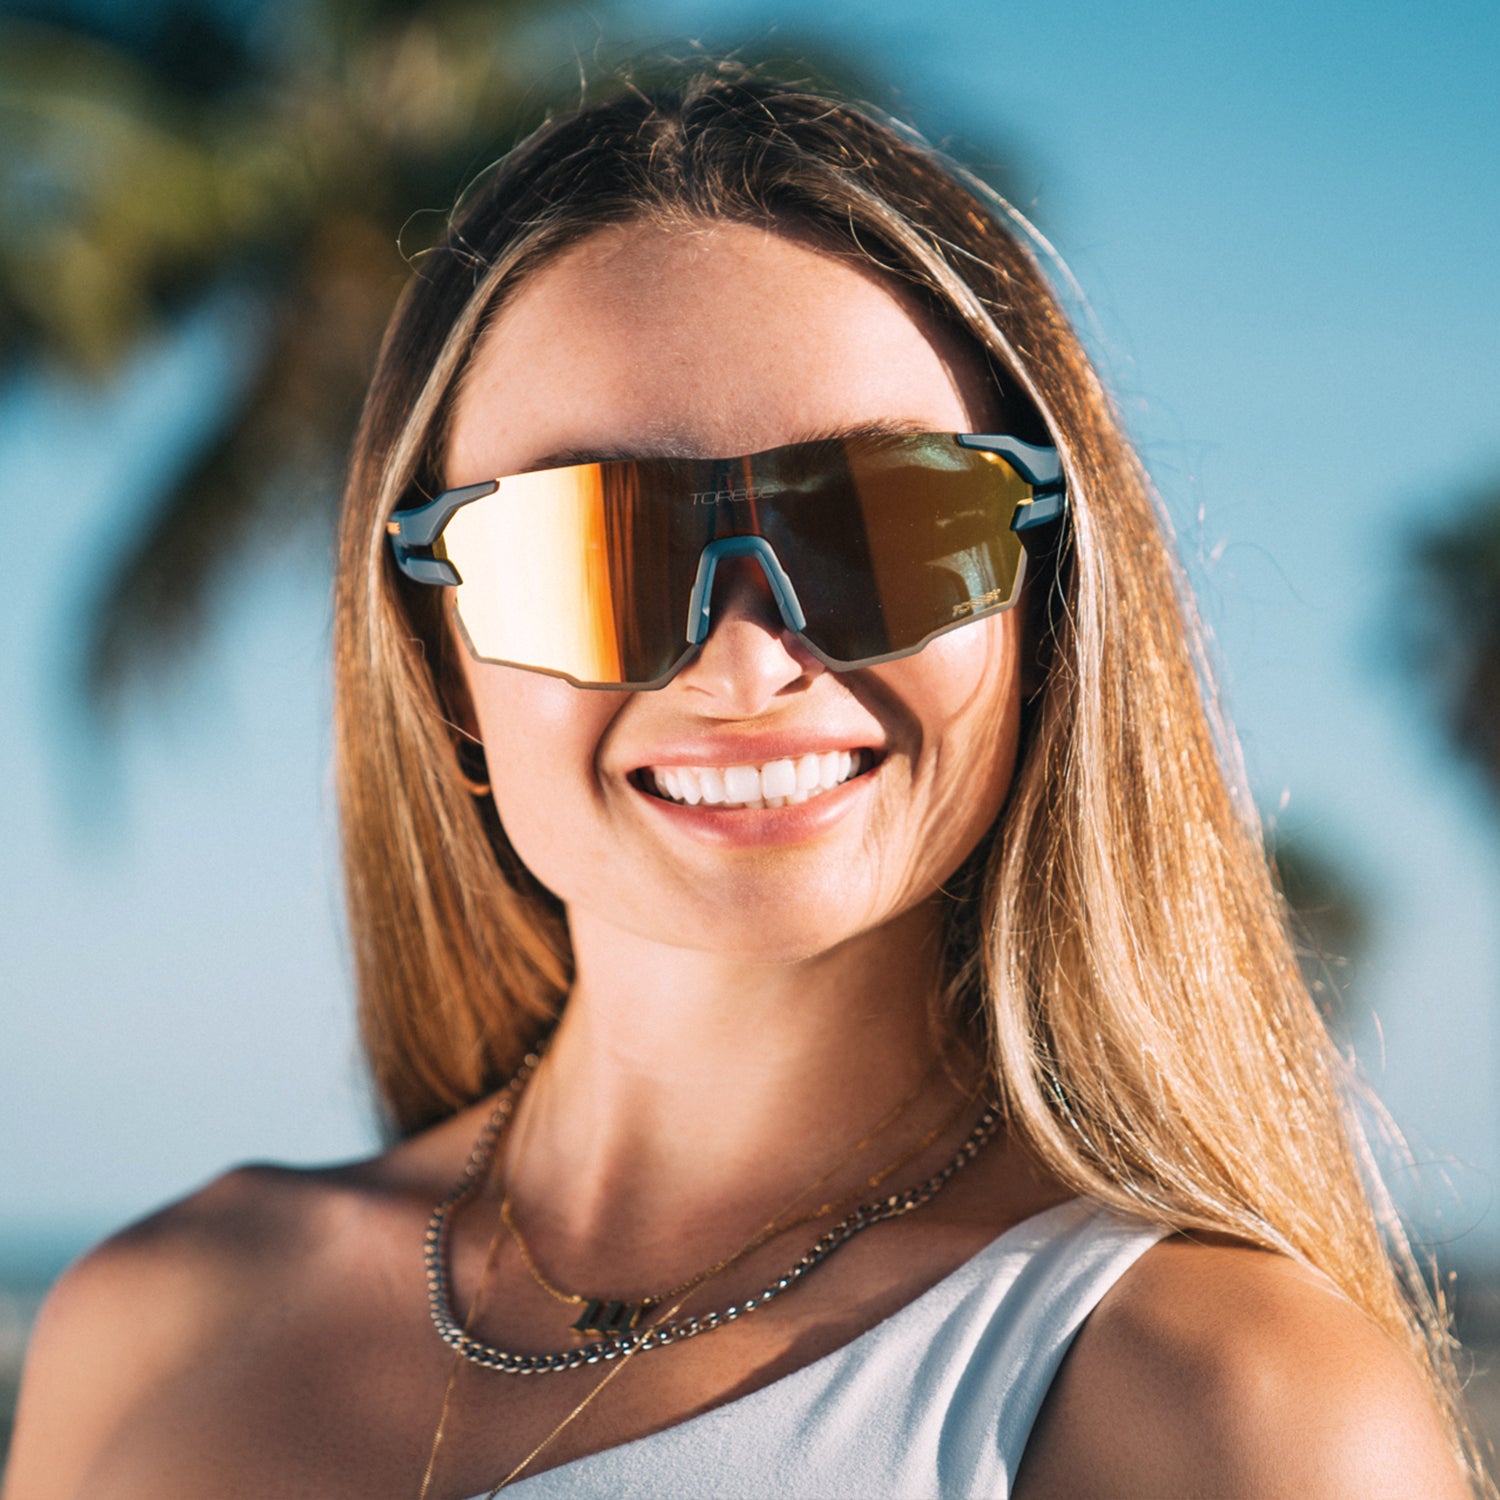 Sunglasses for your summer sports - EYESEEMAG